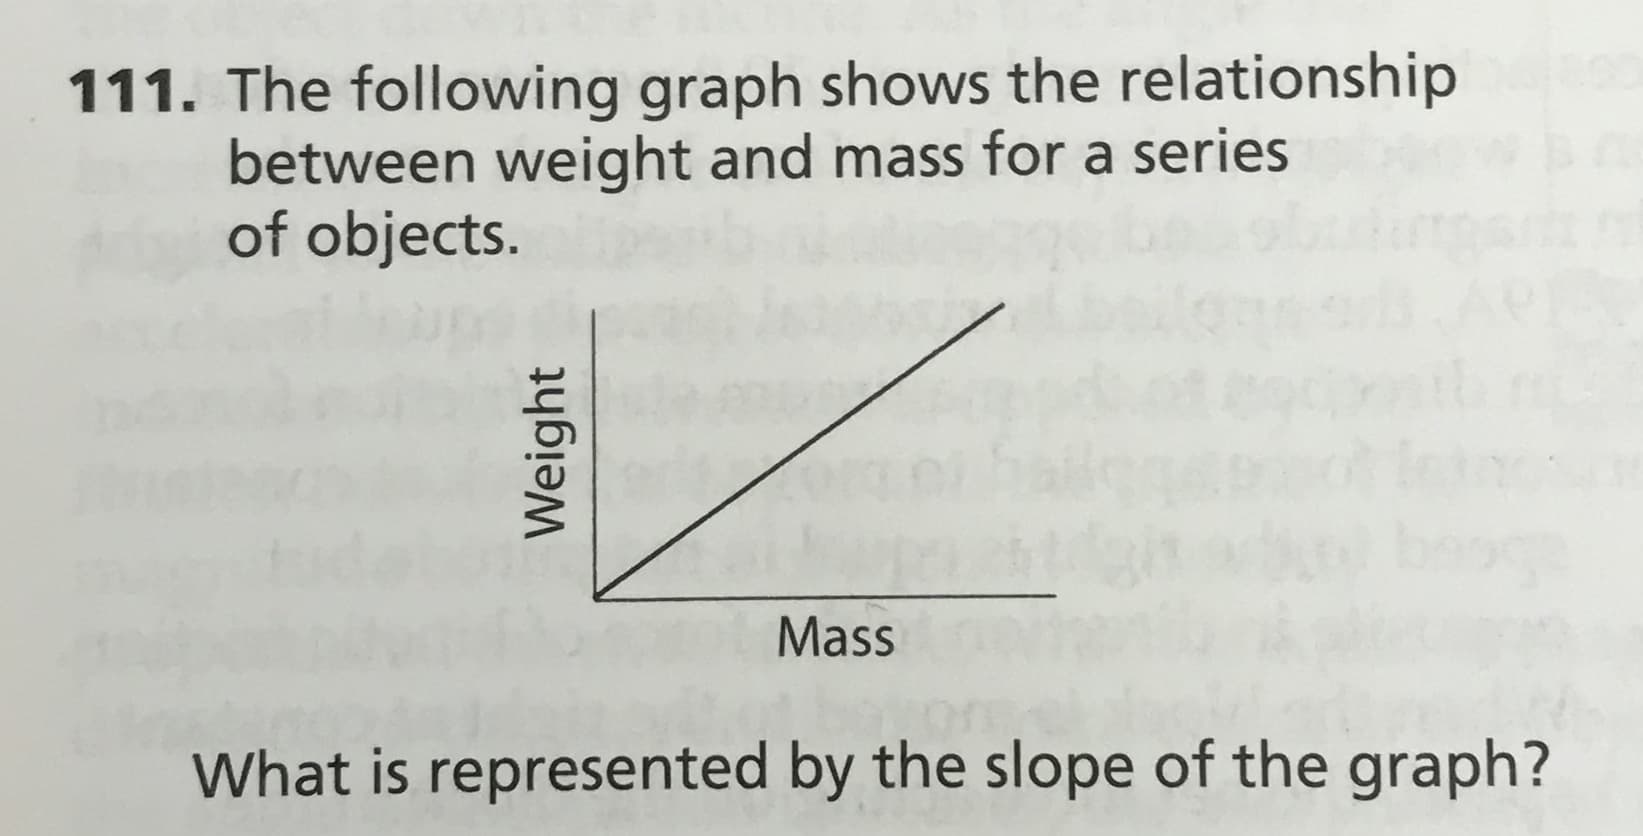 111. The following graph shows the relationship
between weight and mass for a series
of objects.
Mass
What is represented by the slope of the graph?
Weight
